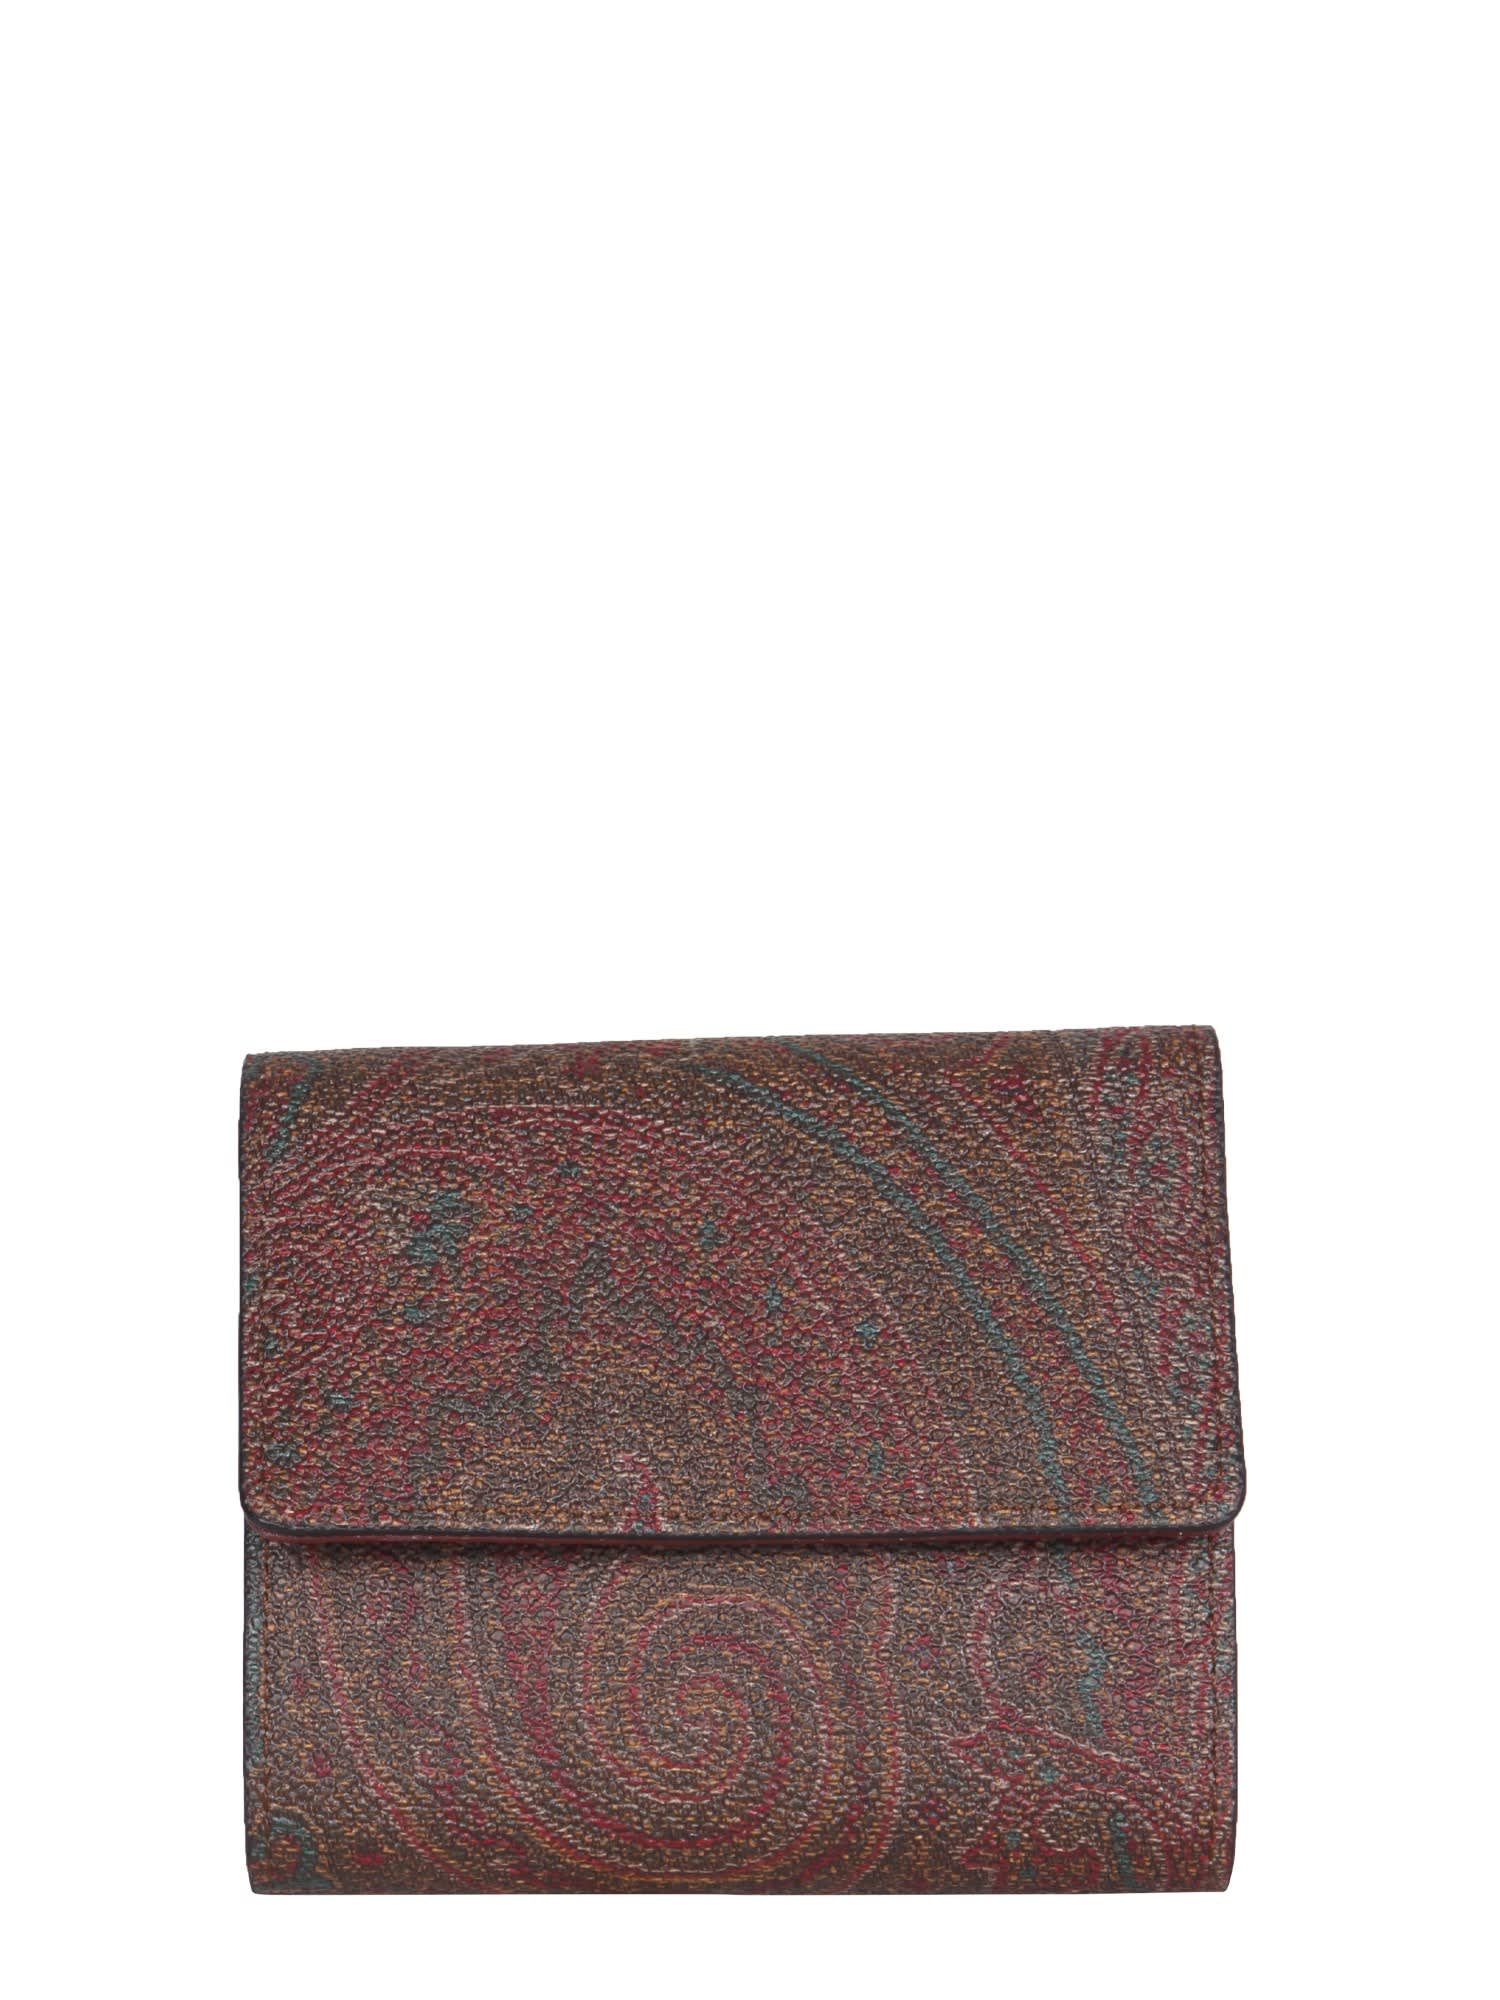 Etro Wallet With Paisley Pattern